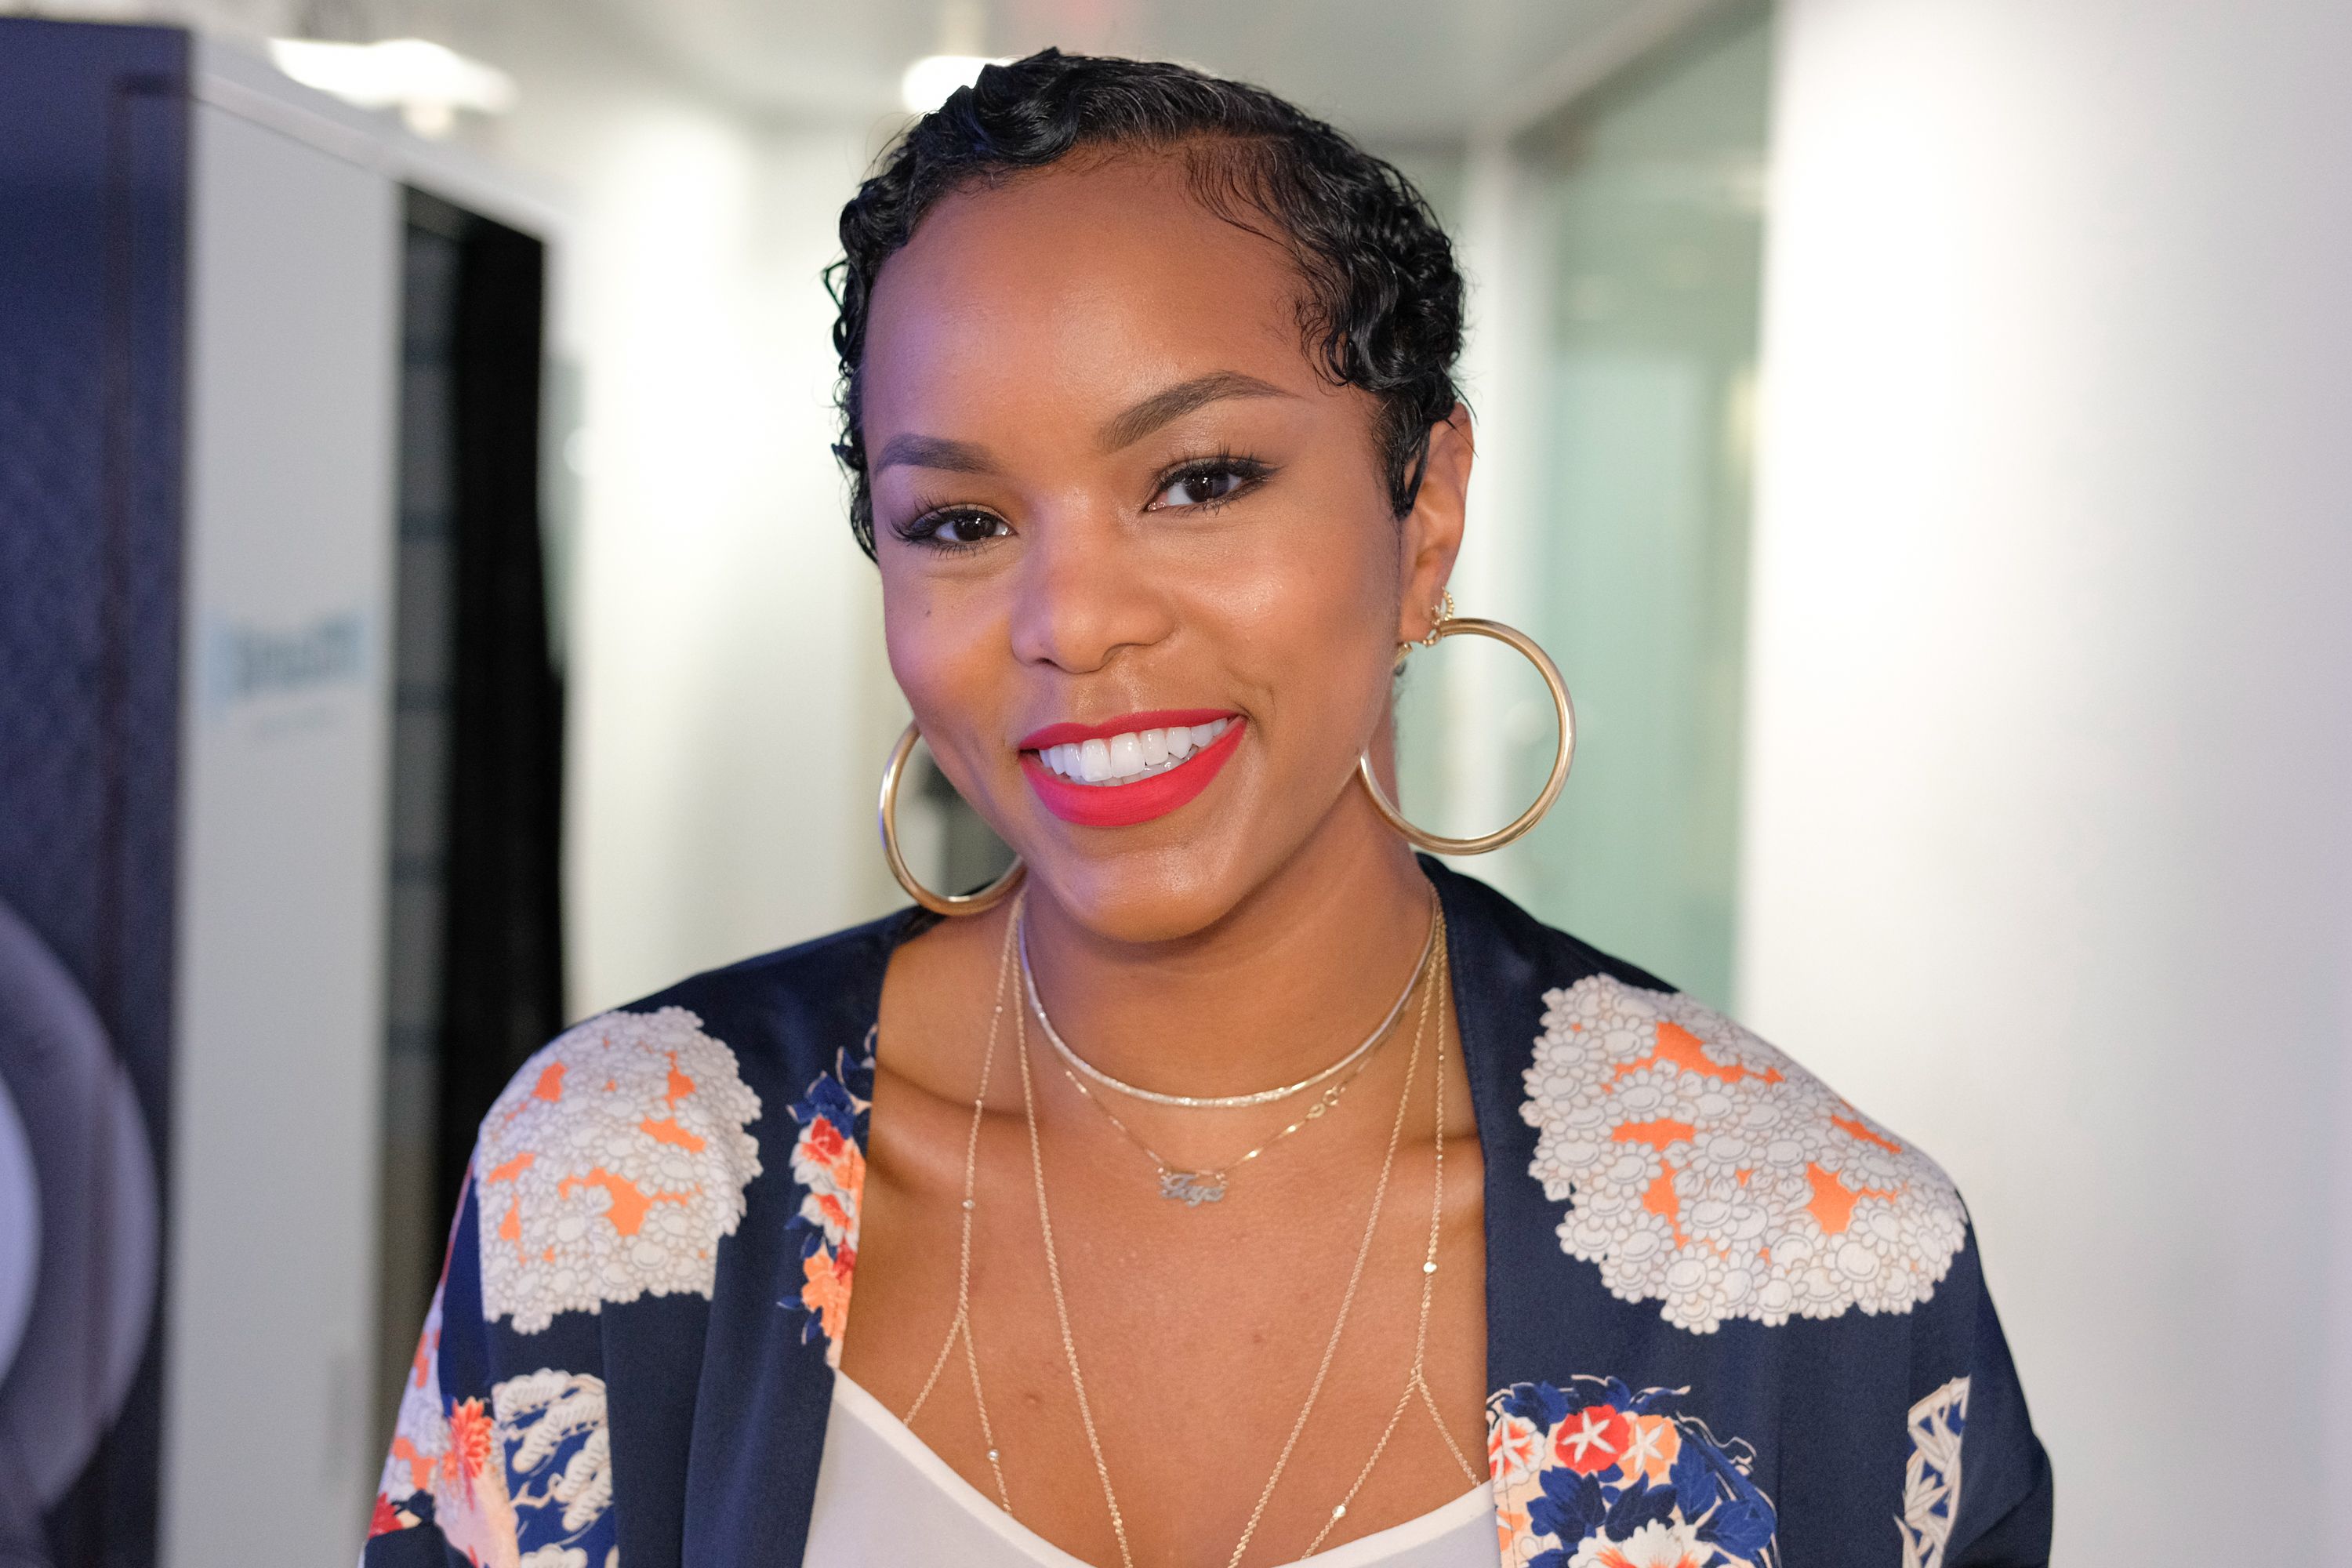 Singer LeToya Luckett visits the SiriusXM Studios on April 19, 2017 in New York City. | Photo: Getty Images